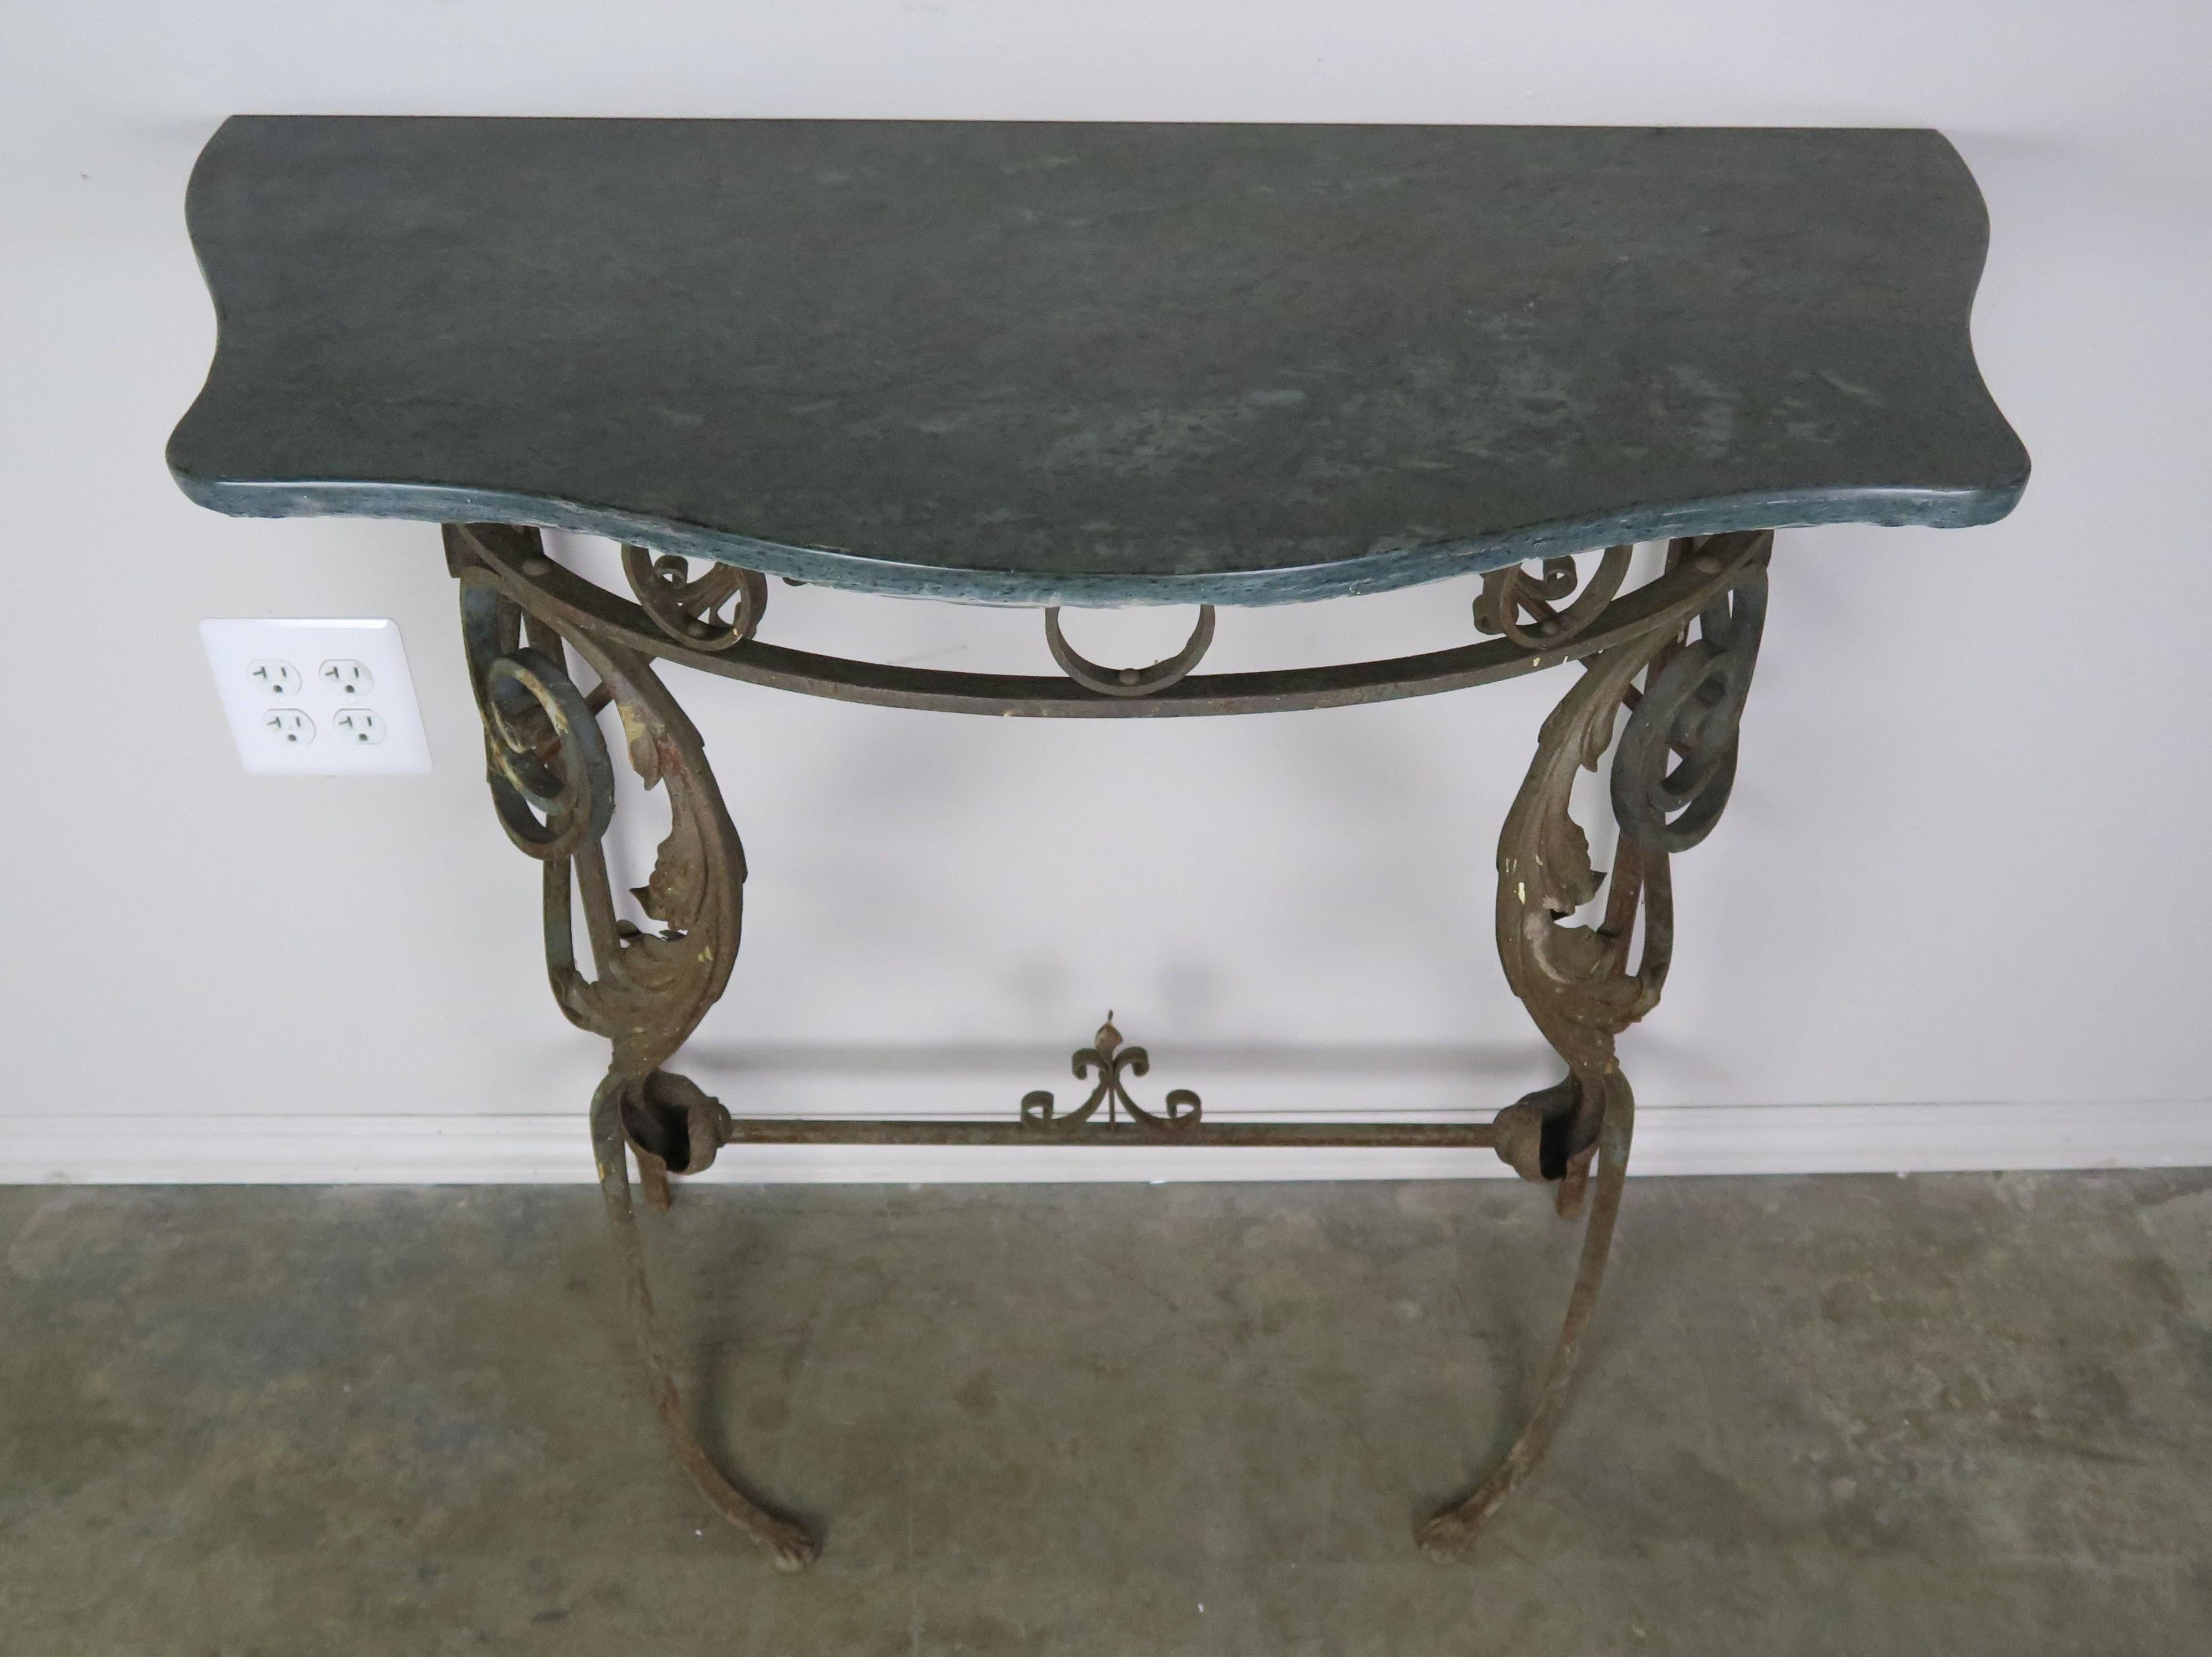 Italian marble-top iron console with gold leaf accents. Two scrolled acanthus leaves can be seen in the front with an antiqued gold leaf finish. The serpentine shaped green marble top works perfectly with the iron base.